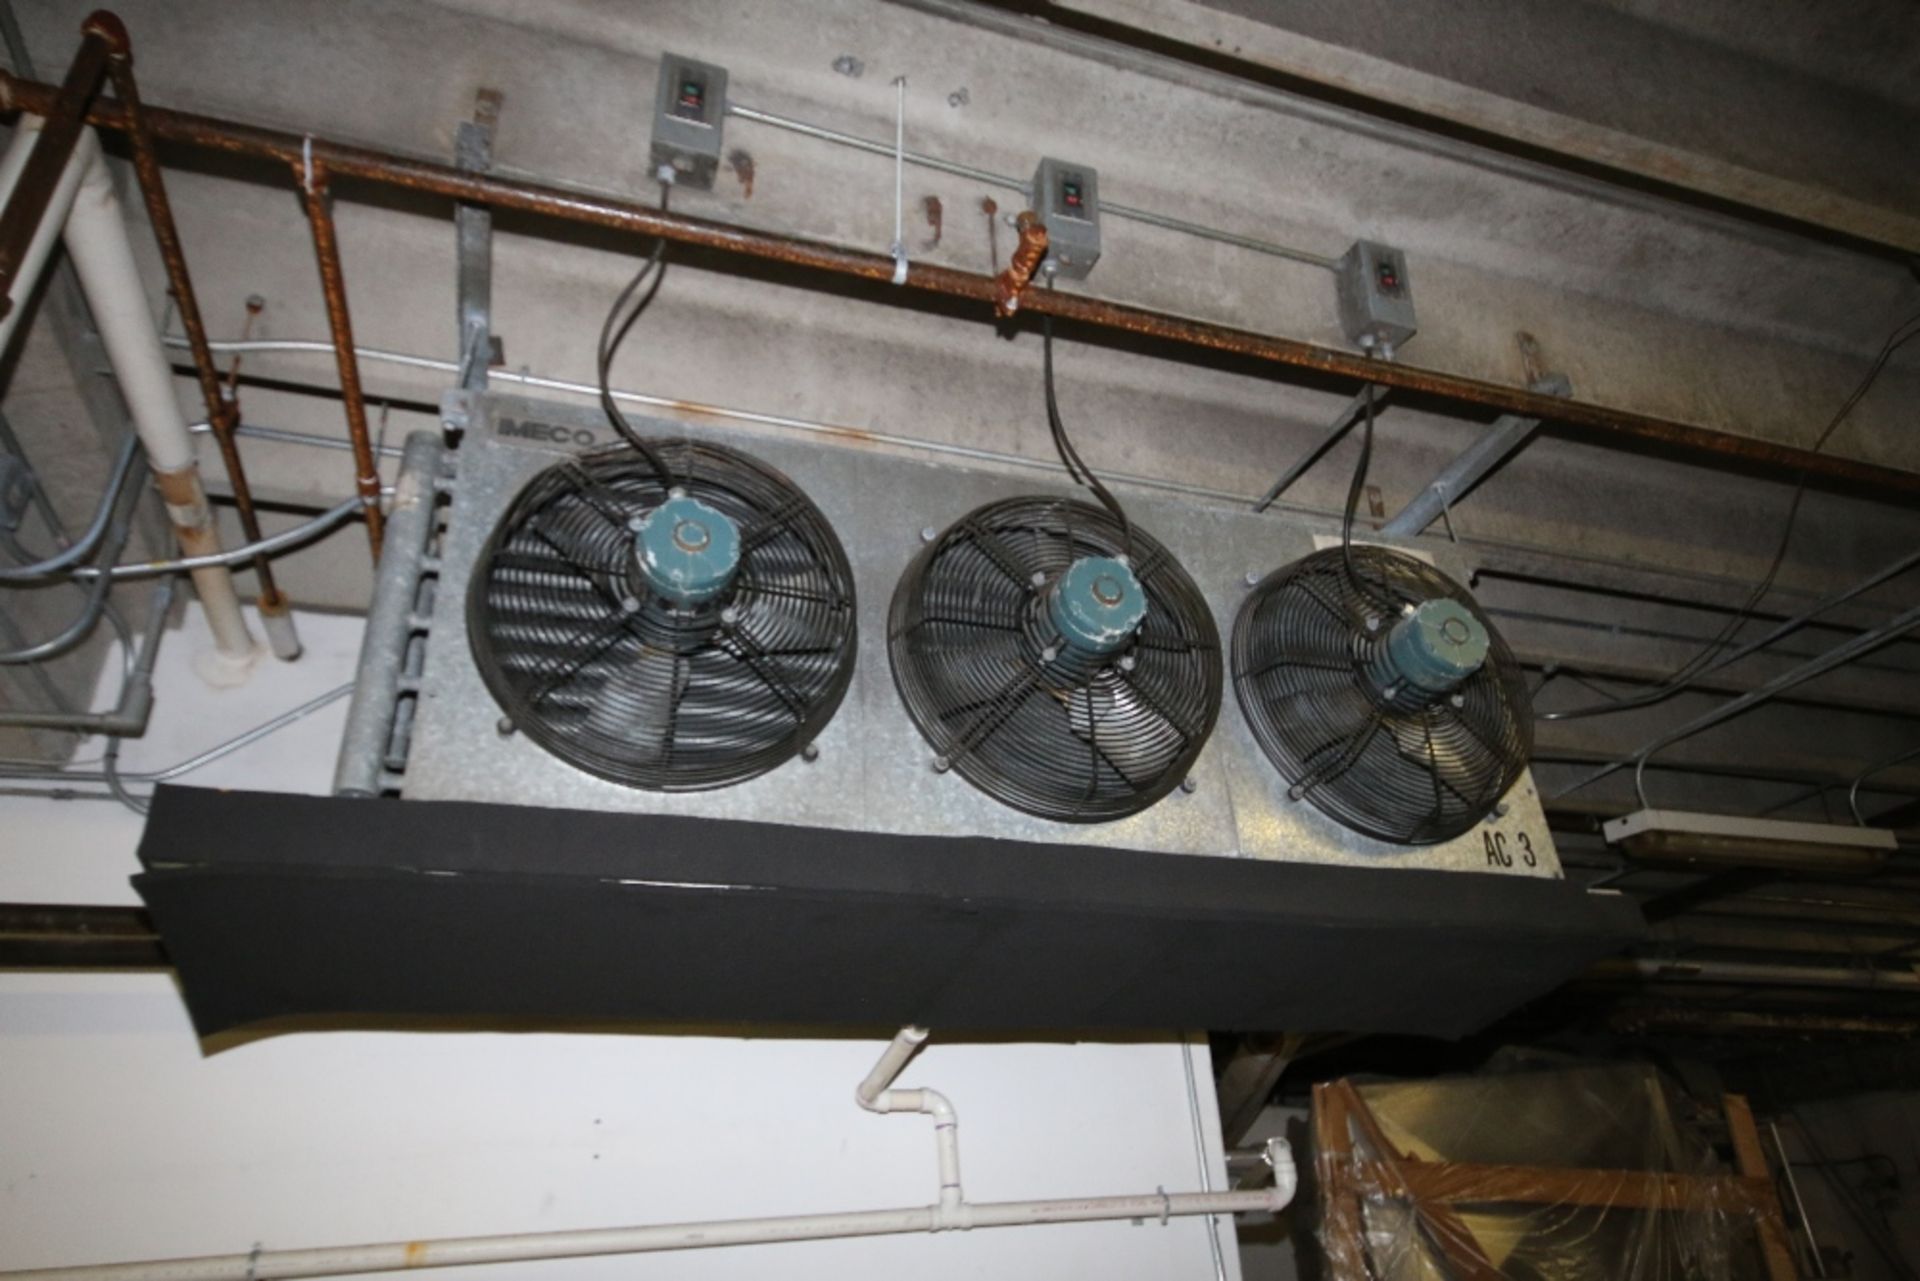 Imeco/Frigid-Coil Evaporator Blowers, (2) 2-Fan, Model GPX235-450, S/N 2343-1LH (Unit AC2) and Model - Image 3 of 6